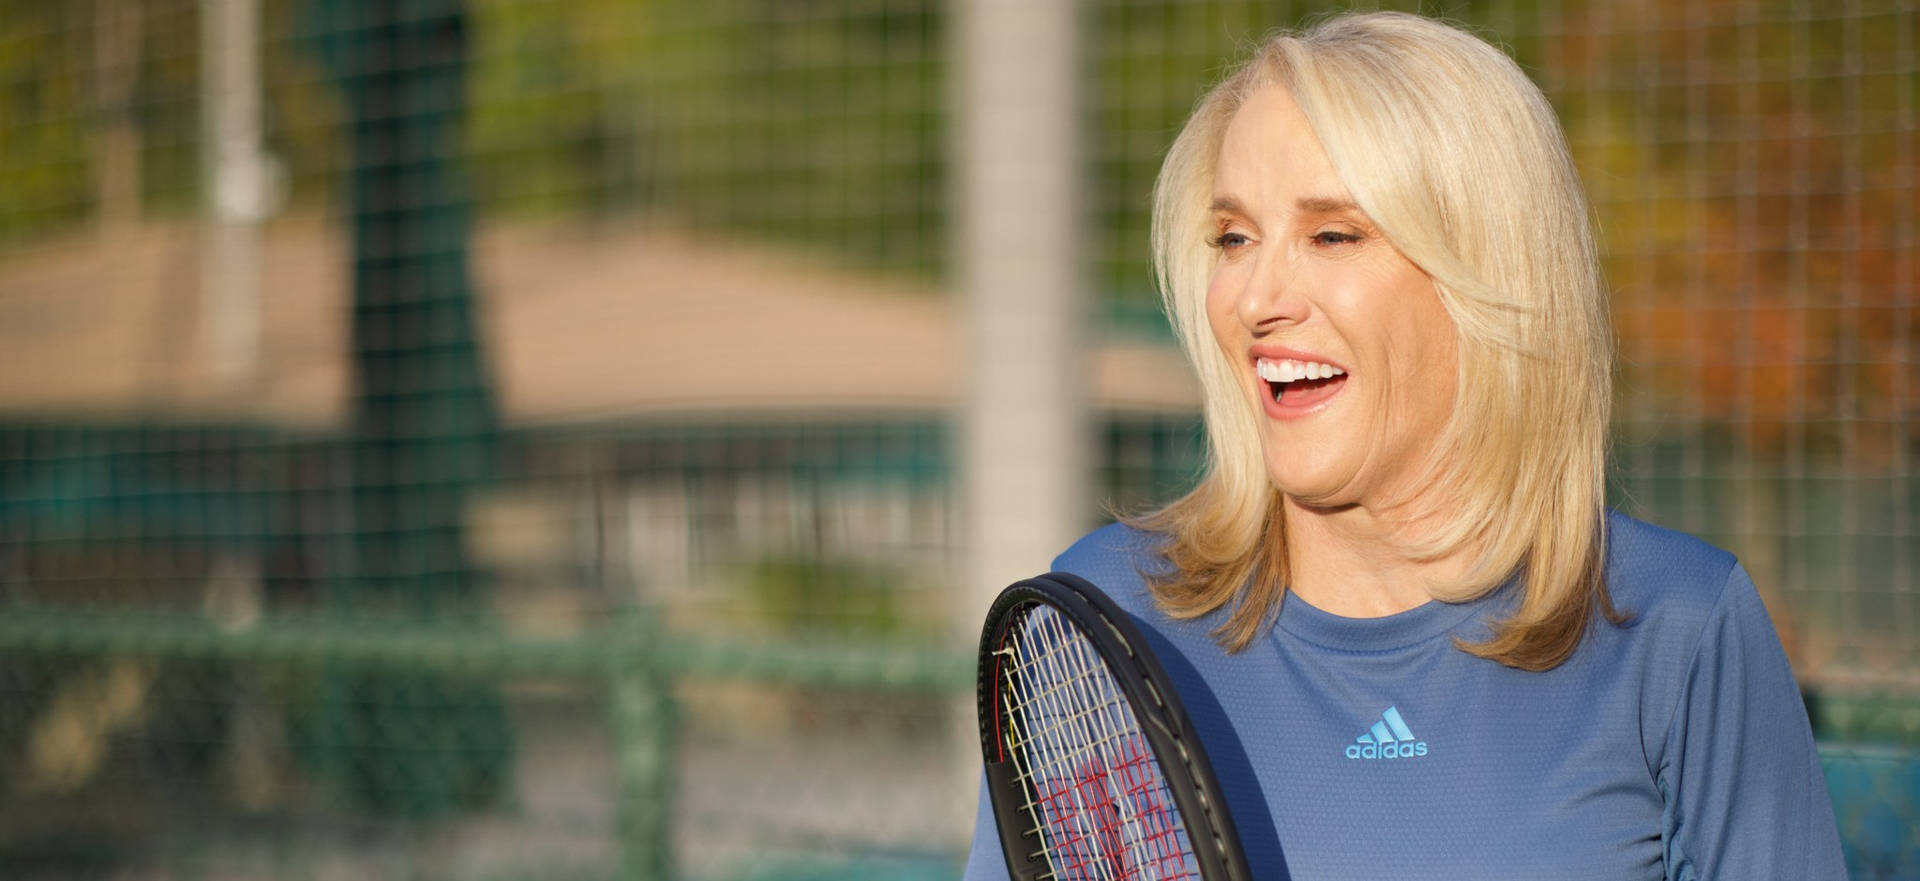 Tennis legend Tracy Austin poised with tennis racket Wallpaper